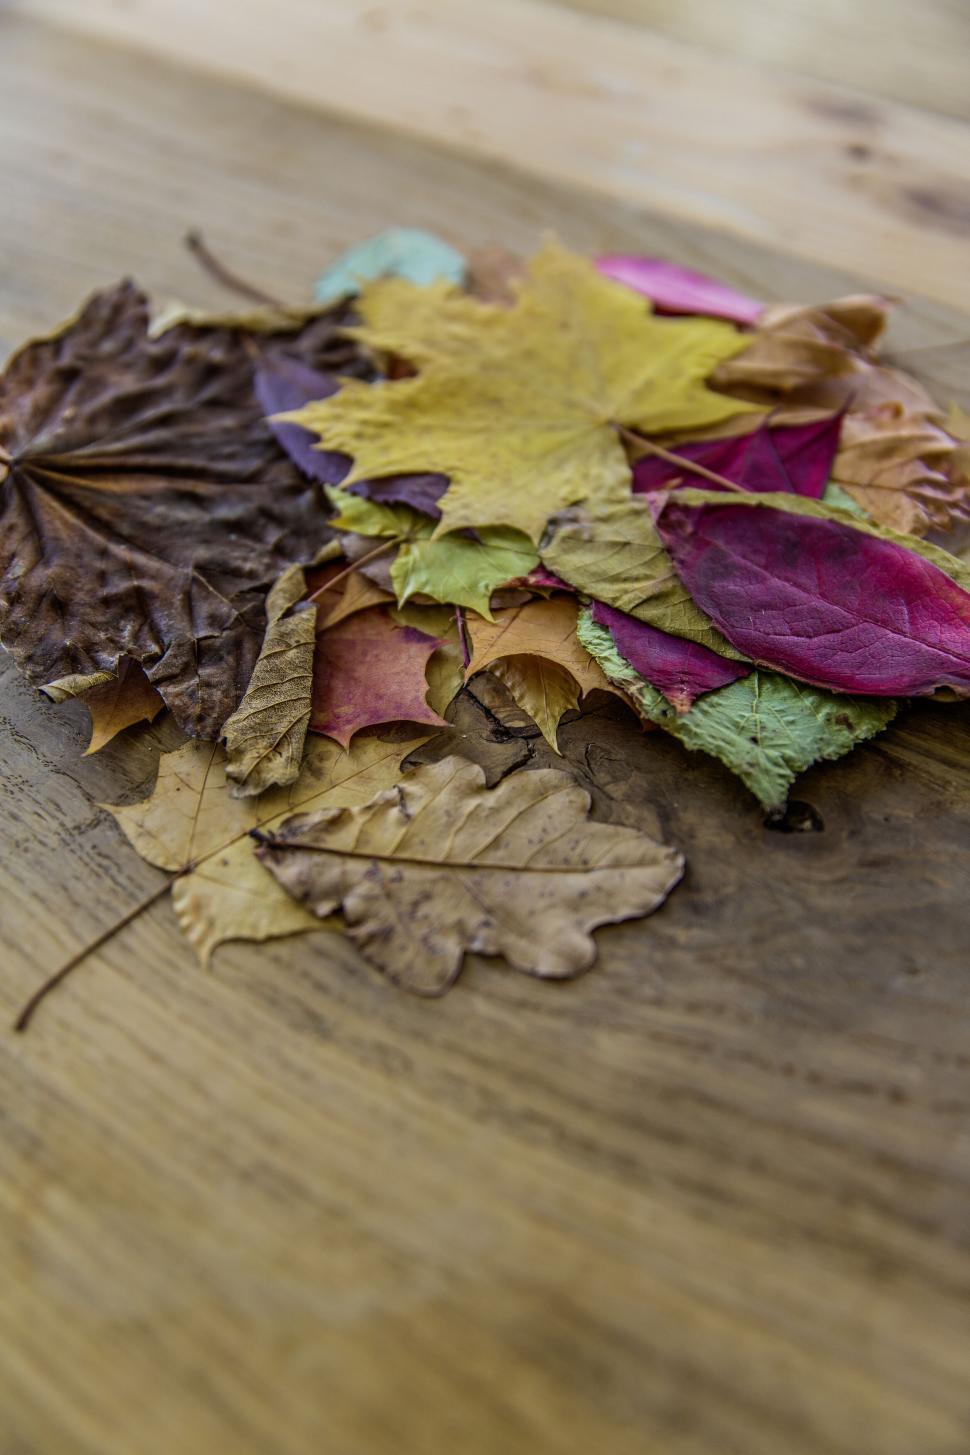 Free Image of Colorful autumn leaves on wooden surface 